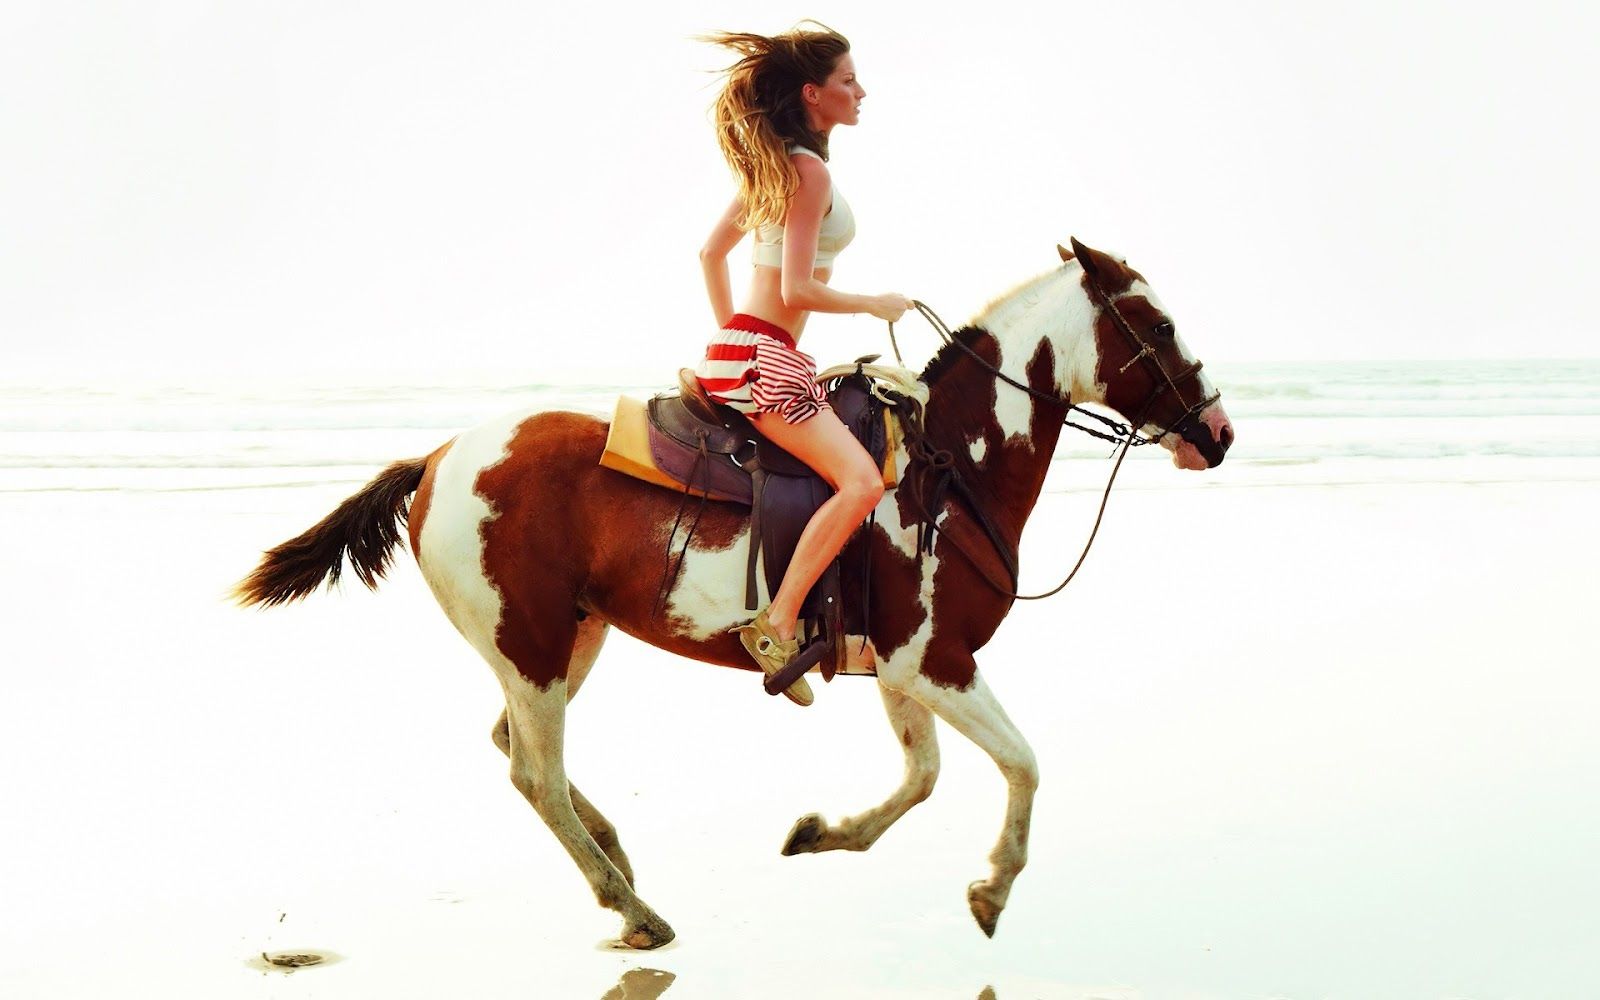 Girl riding horse on the beach | HD Animals Wallpapers